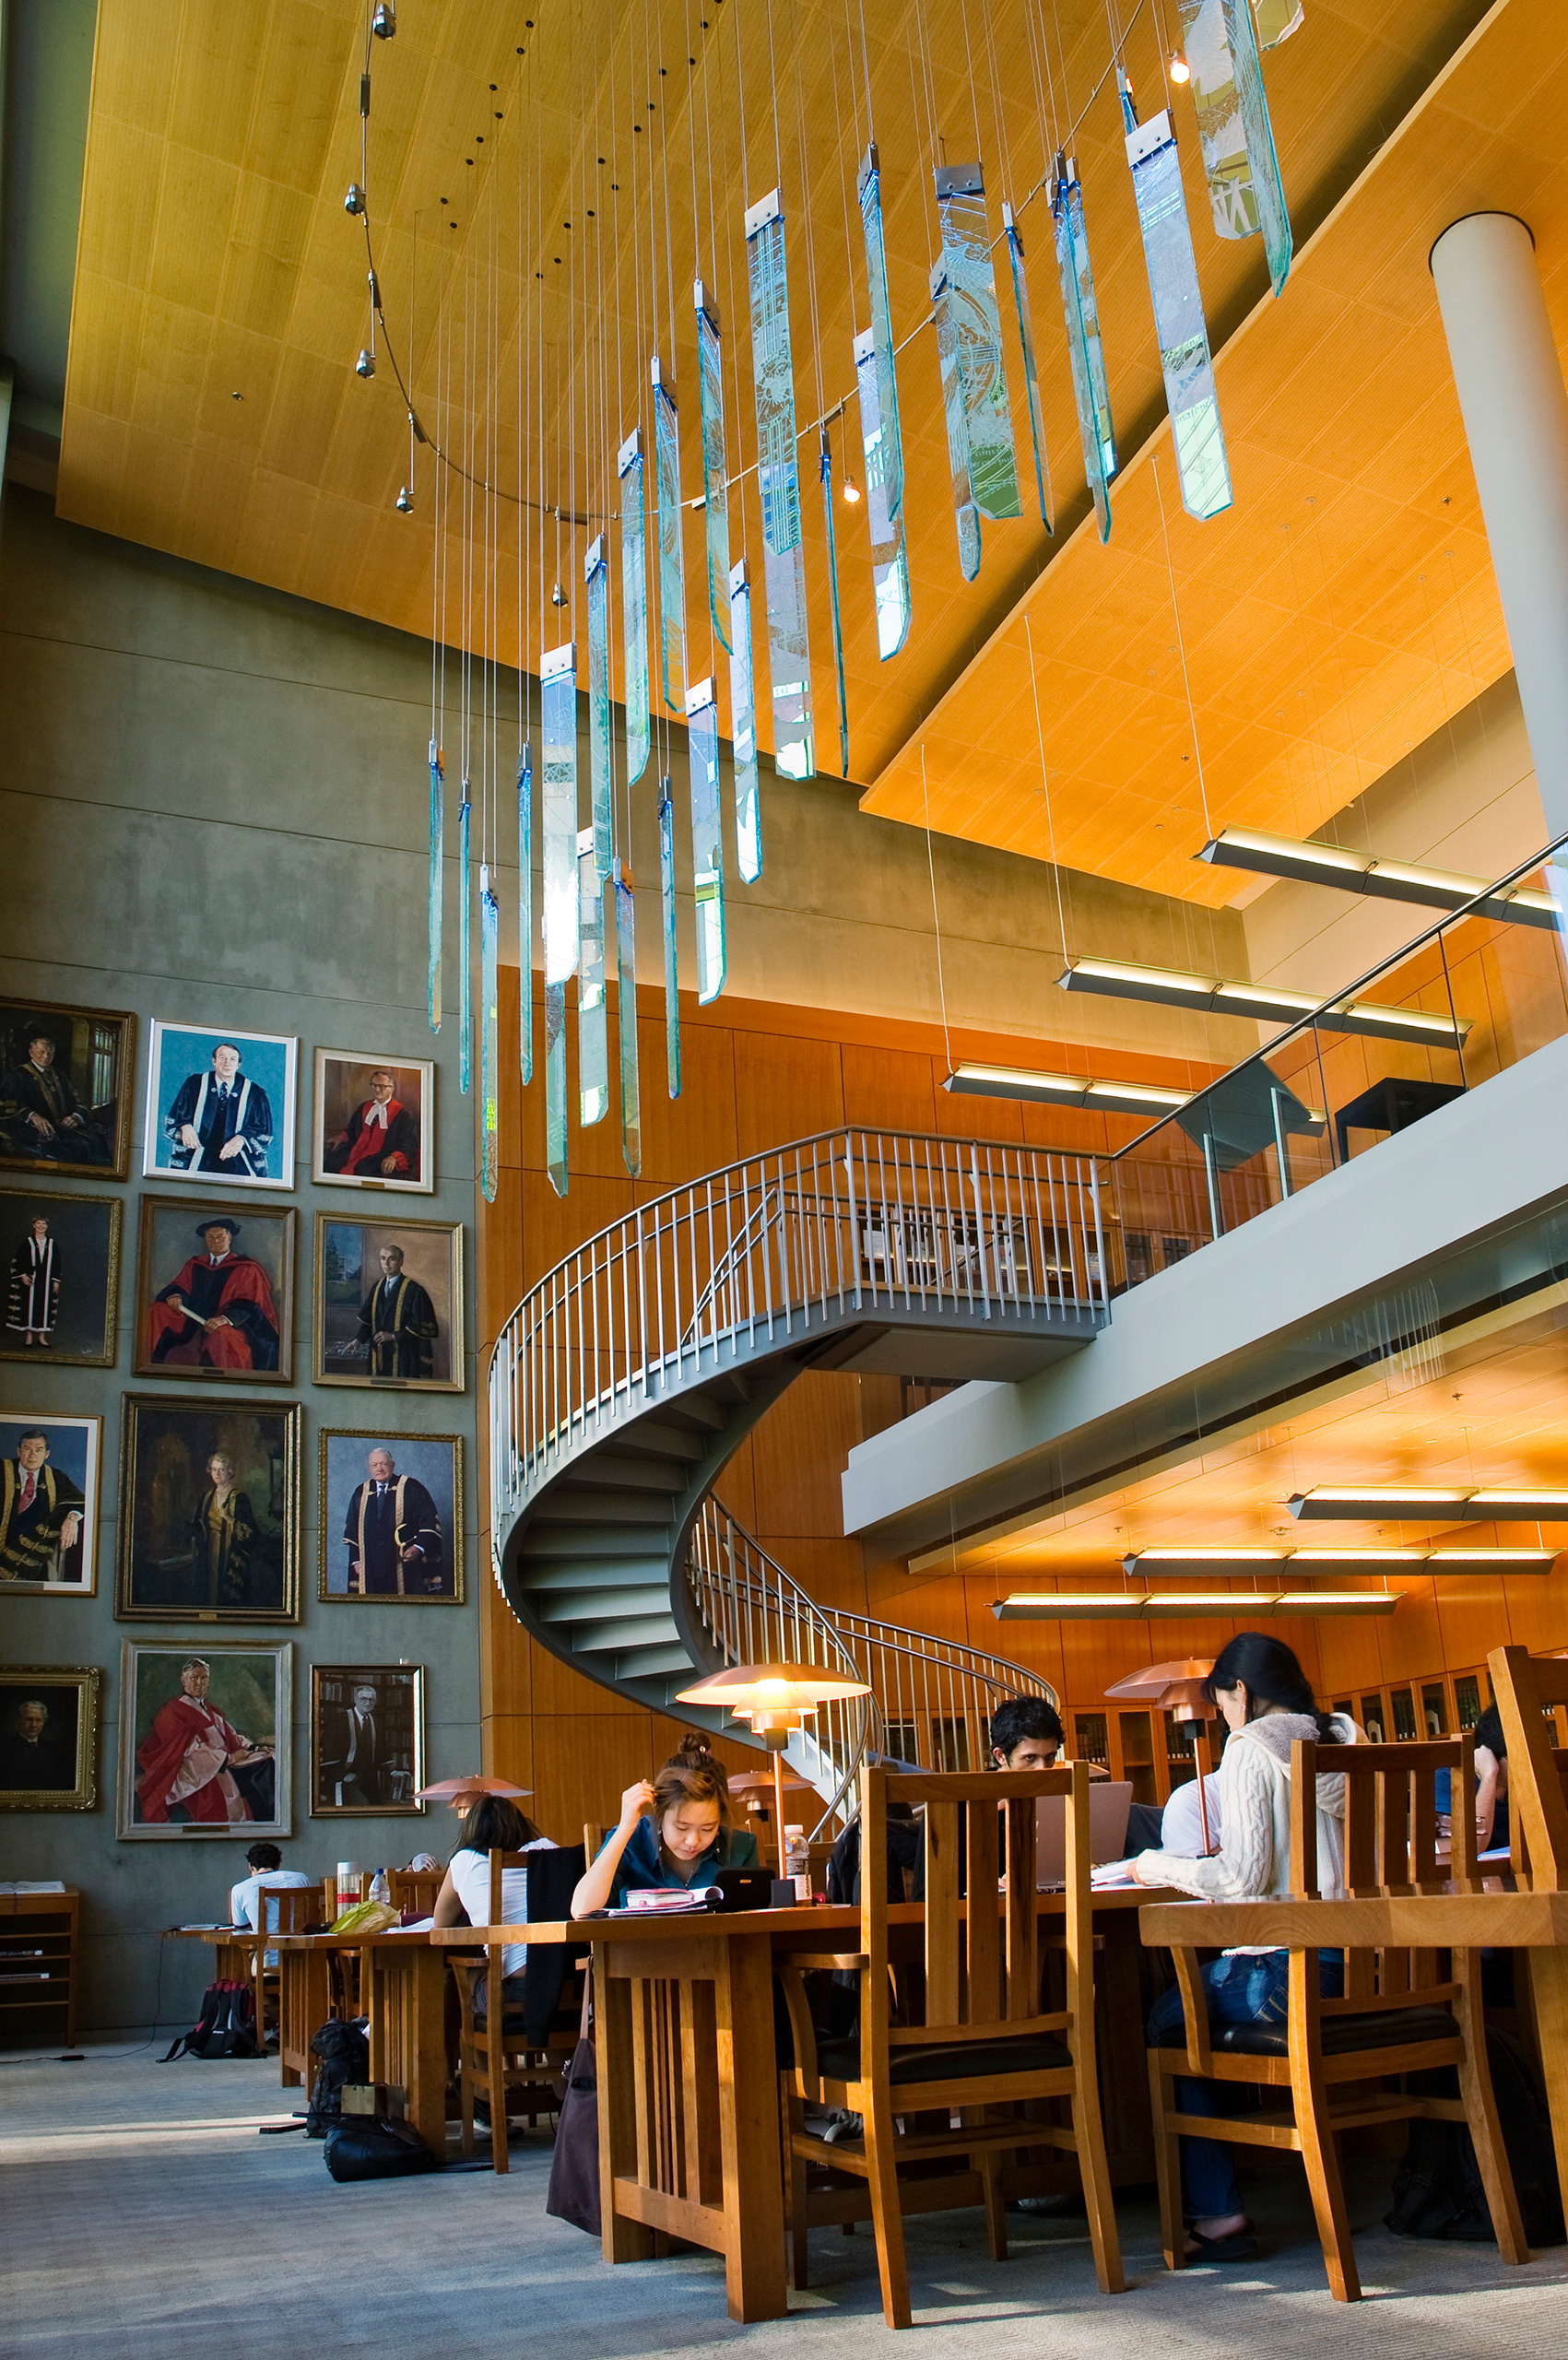 Index library. Vancouver Campus. University of British Columbia. Kingsford Learning Centre. Campus Learning Center.